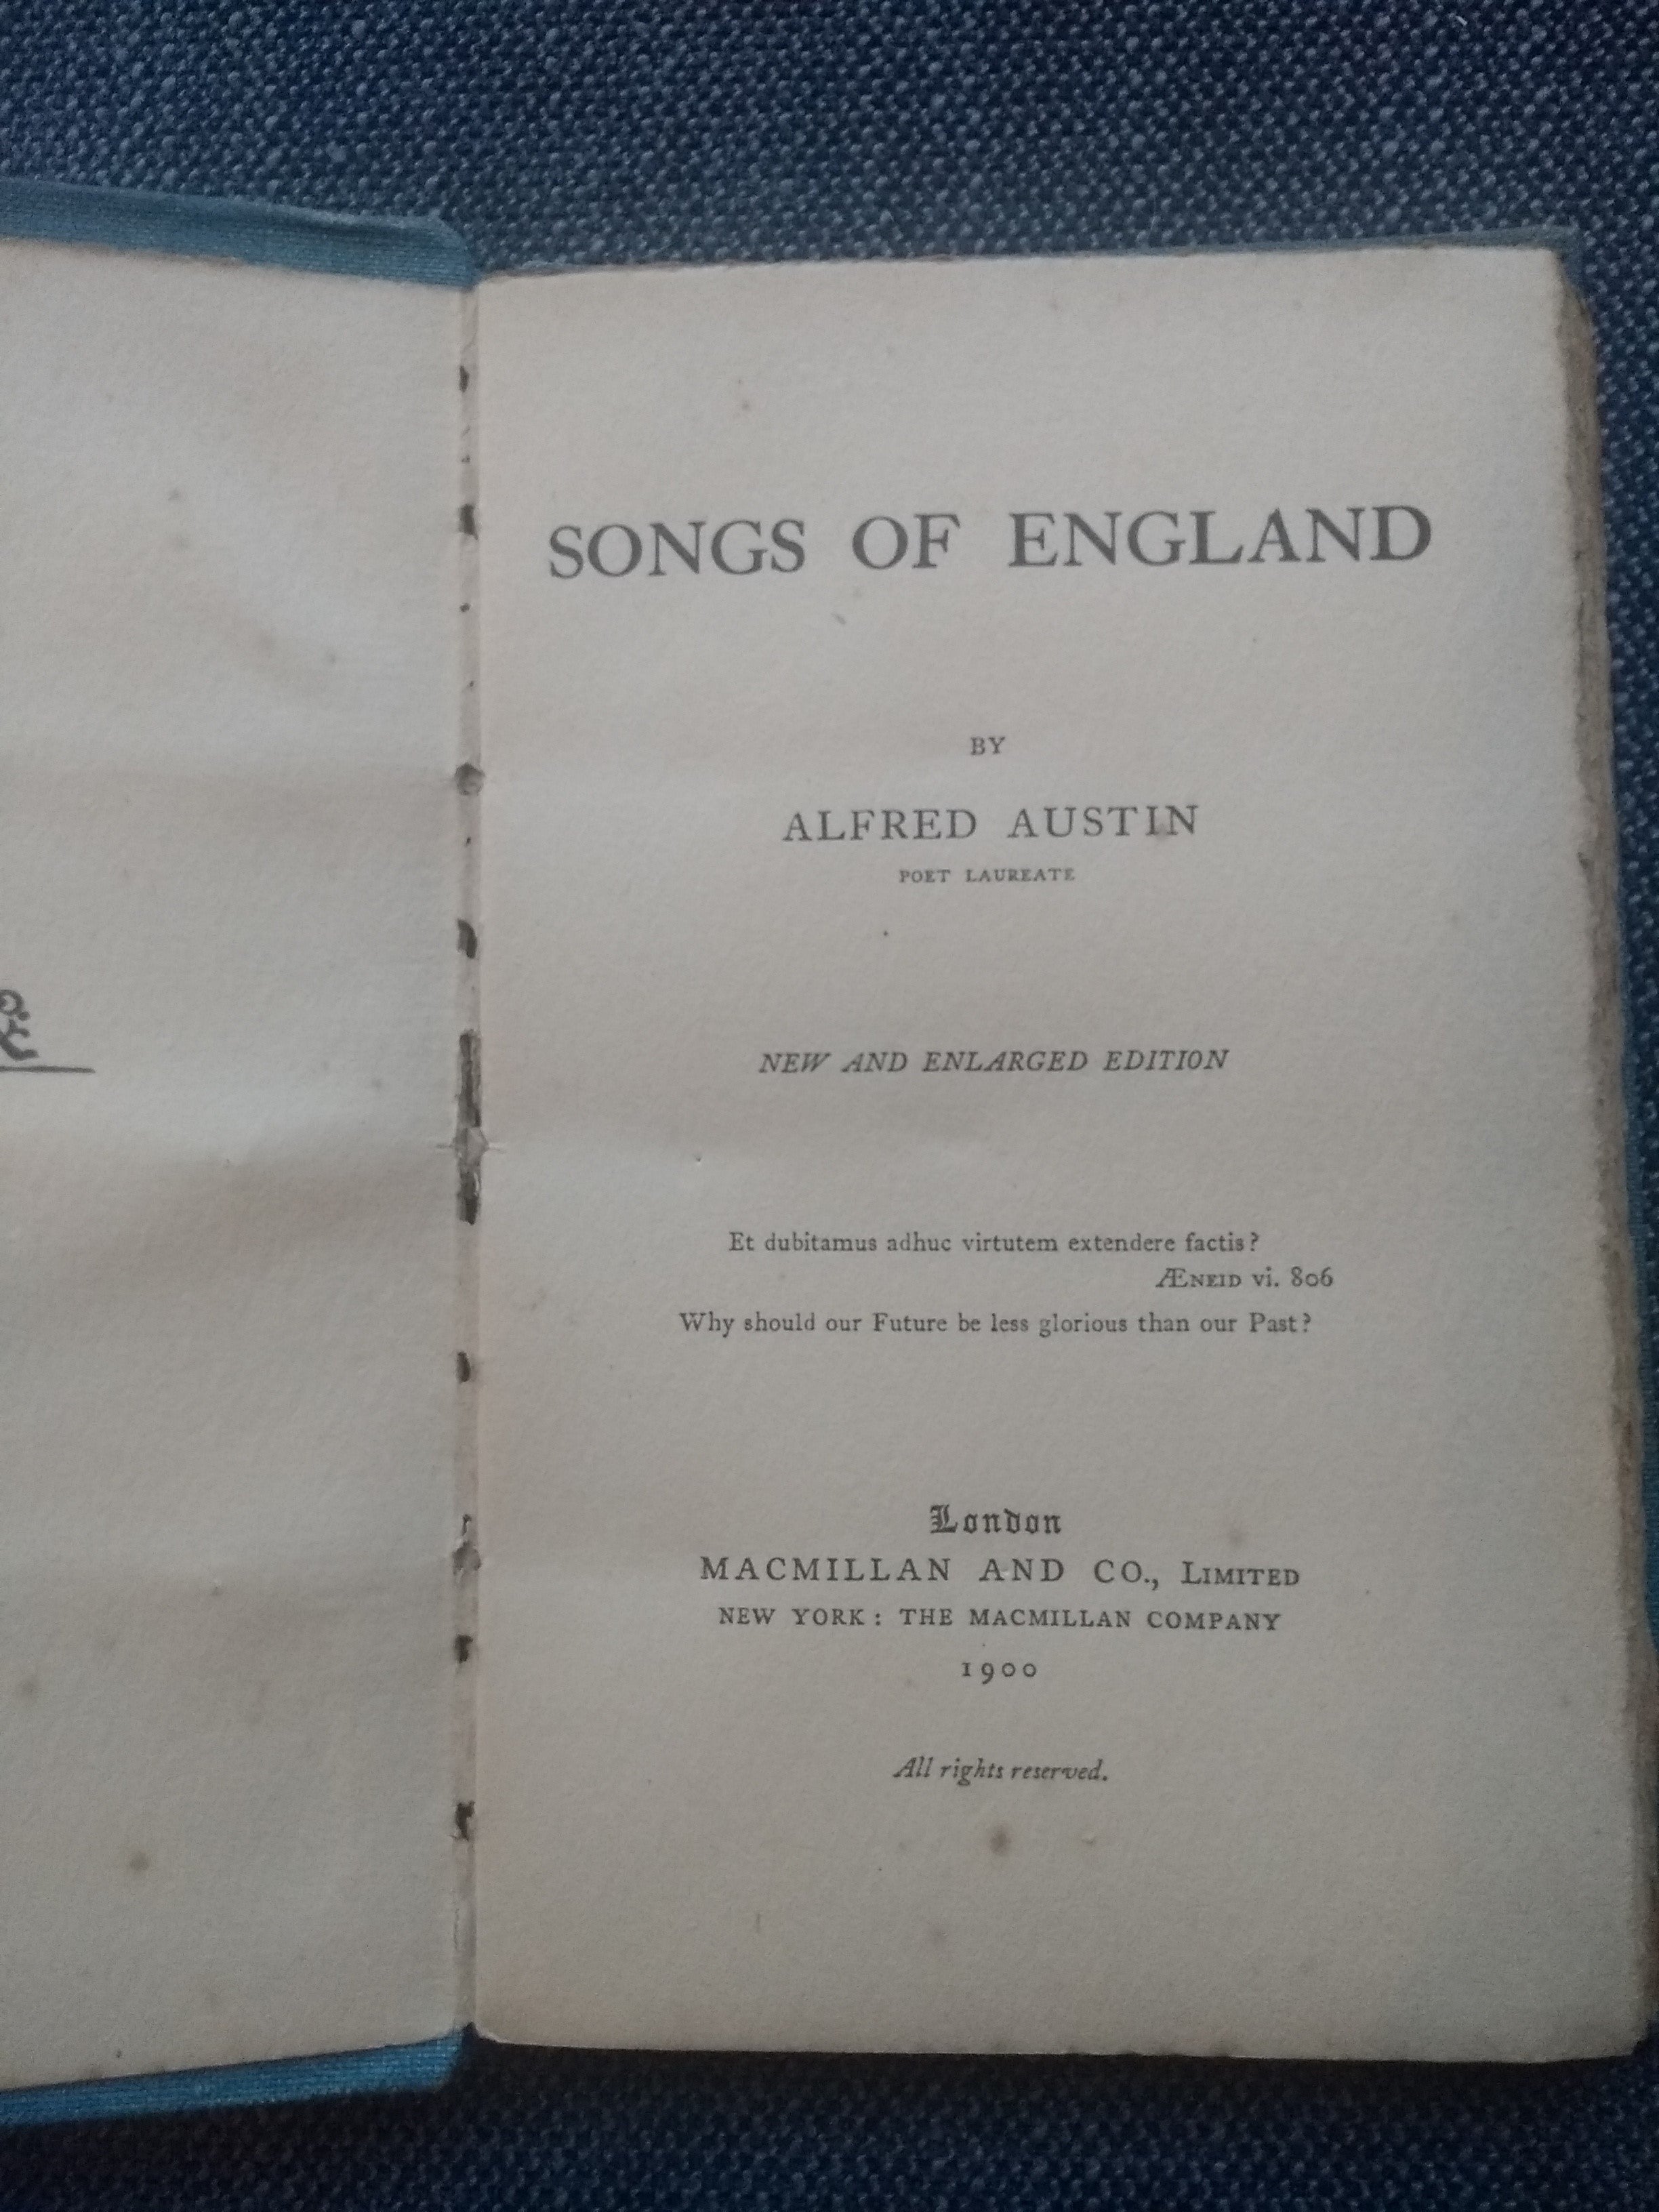 Songs of England, new and enlarged edition, by Alfred Austin.